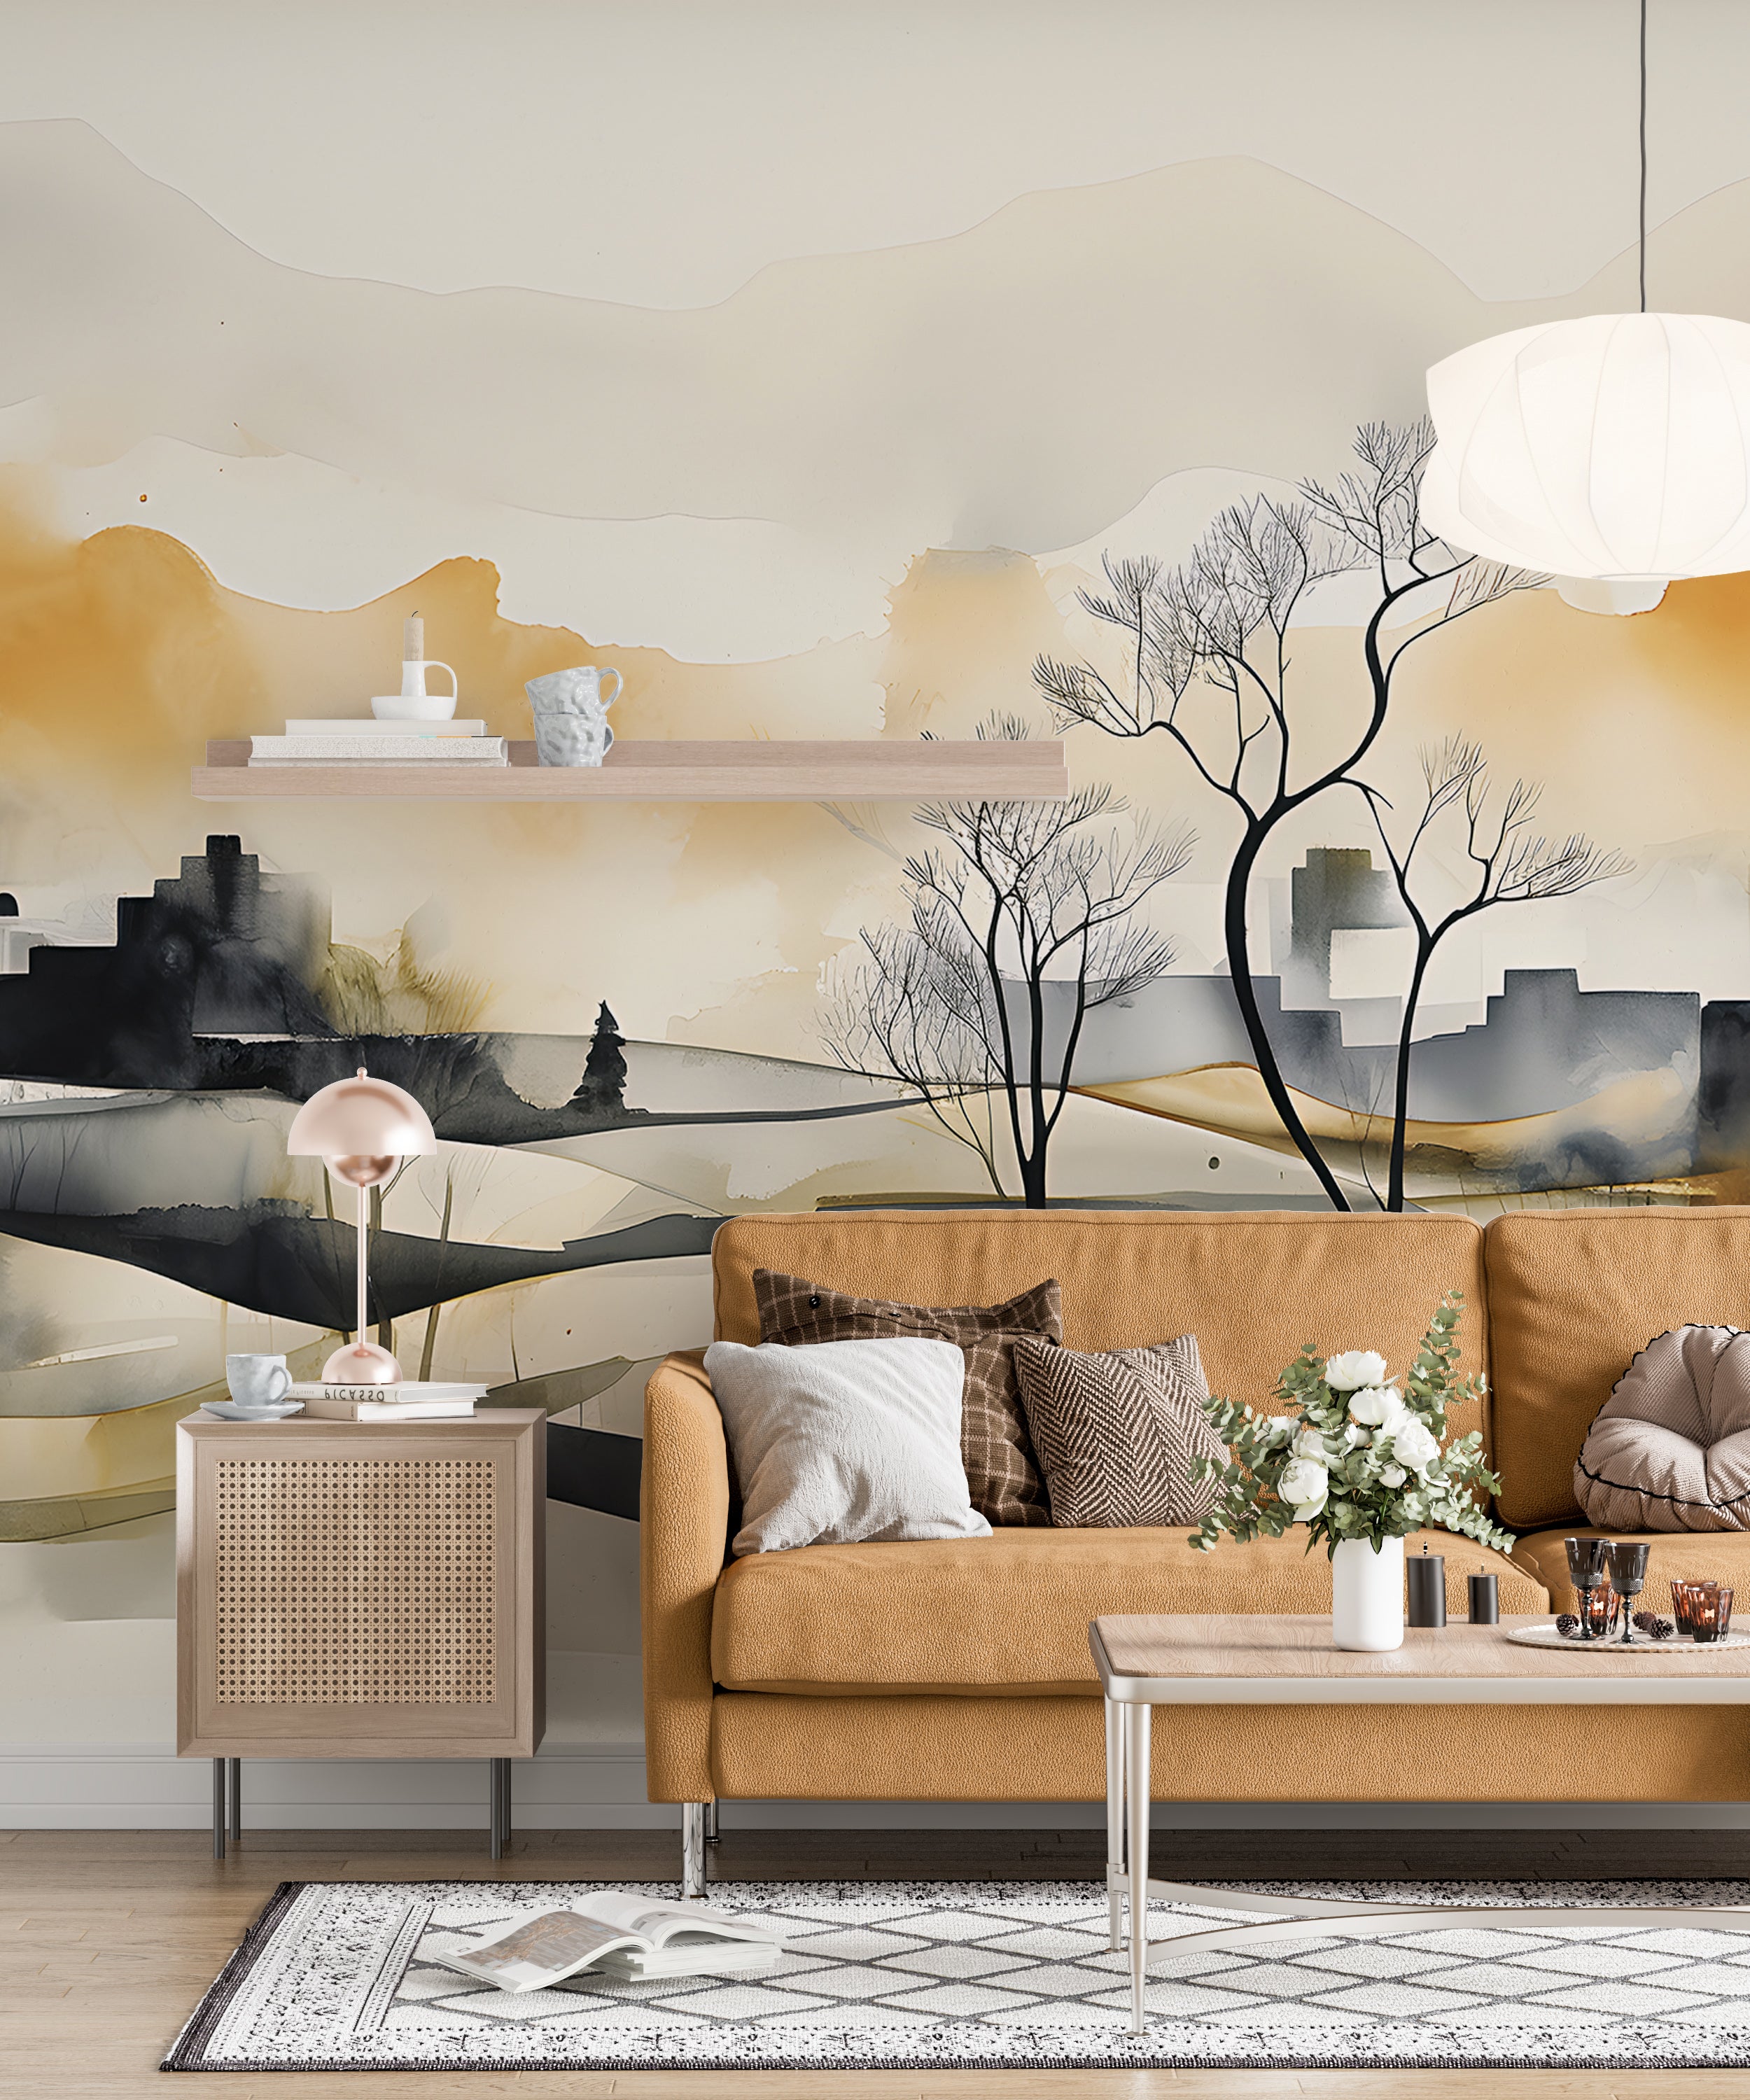 Abstract Landscape Wallpaper for Home Interiors